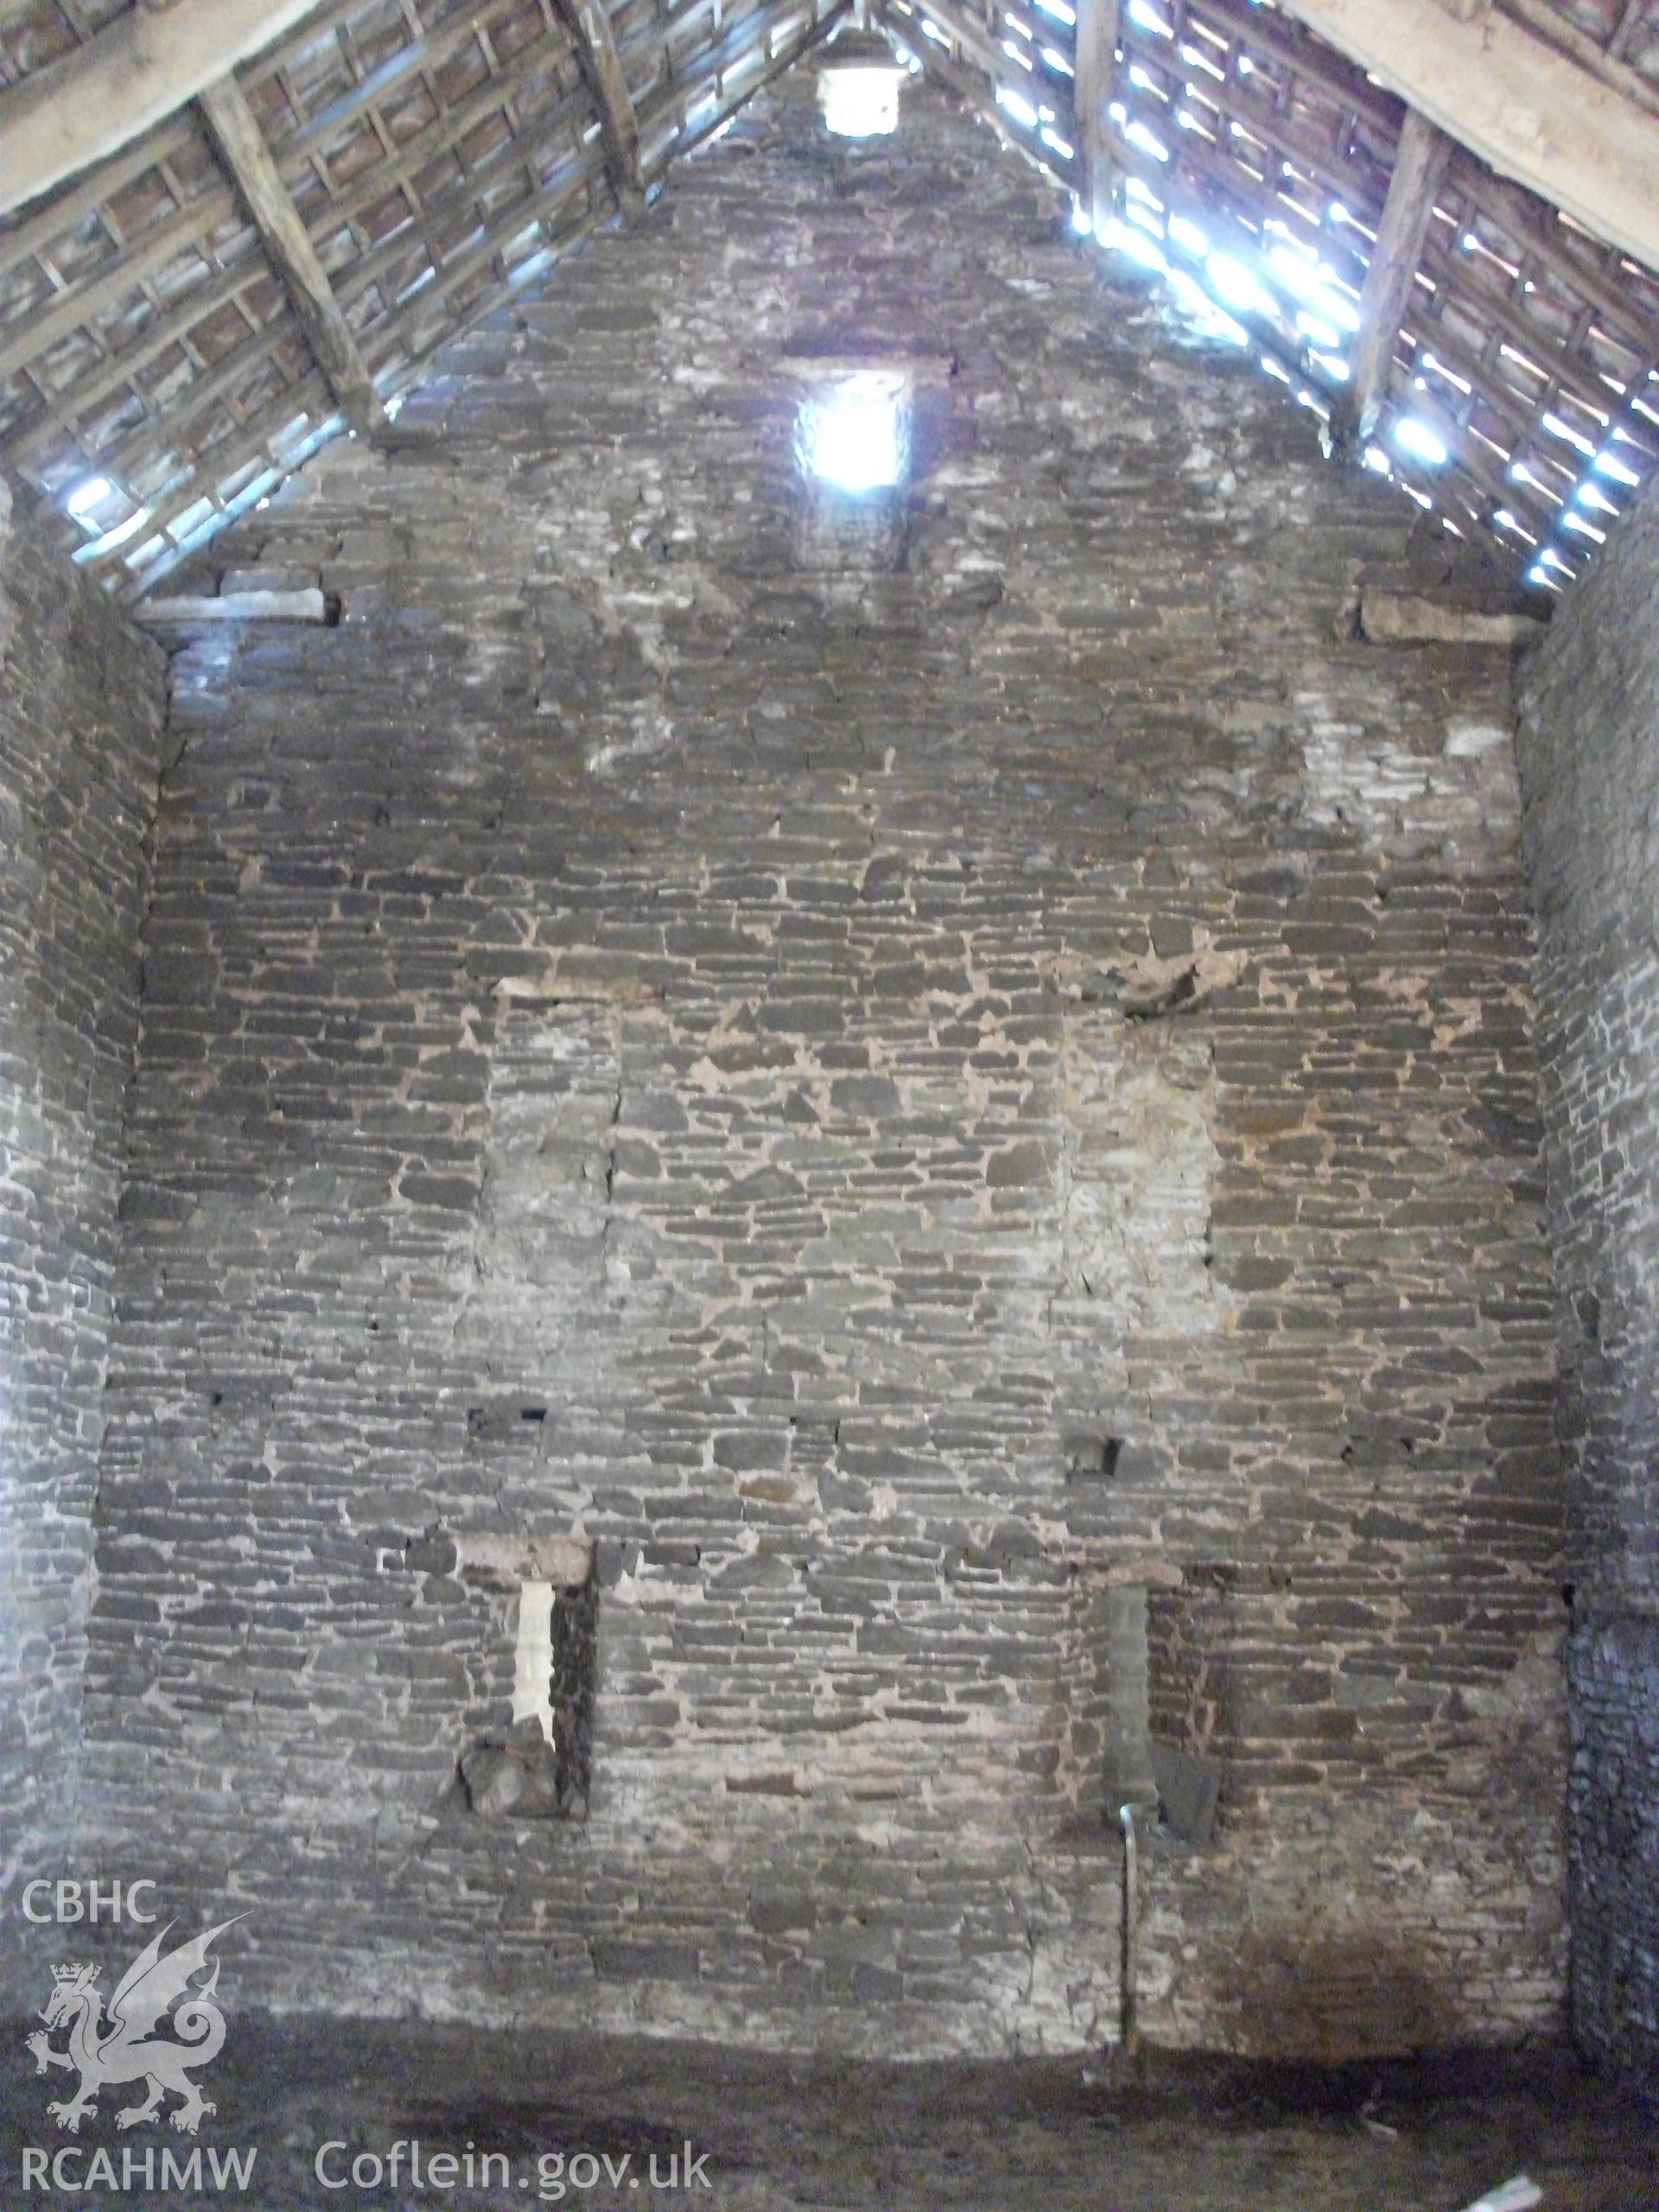 Colour digital photograph of interior of barn at Llangwm Isaf Farm, received in the course of Emergency Recording case ref no RCS2/1/1599.